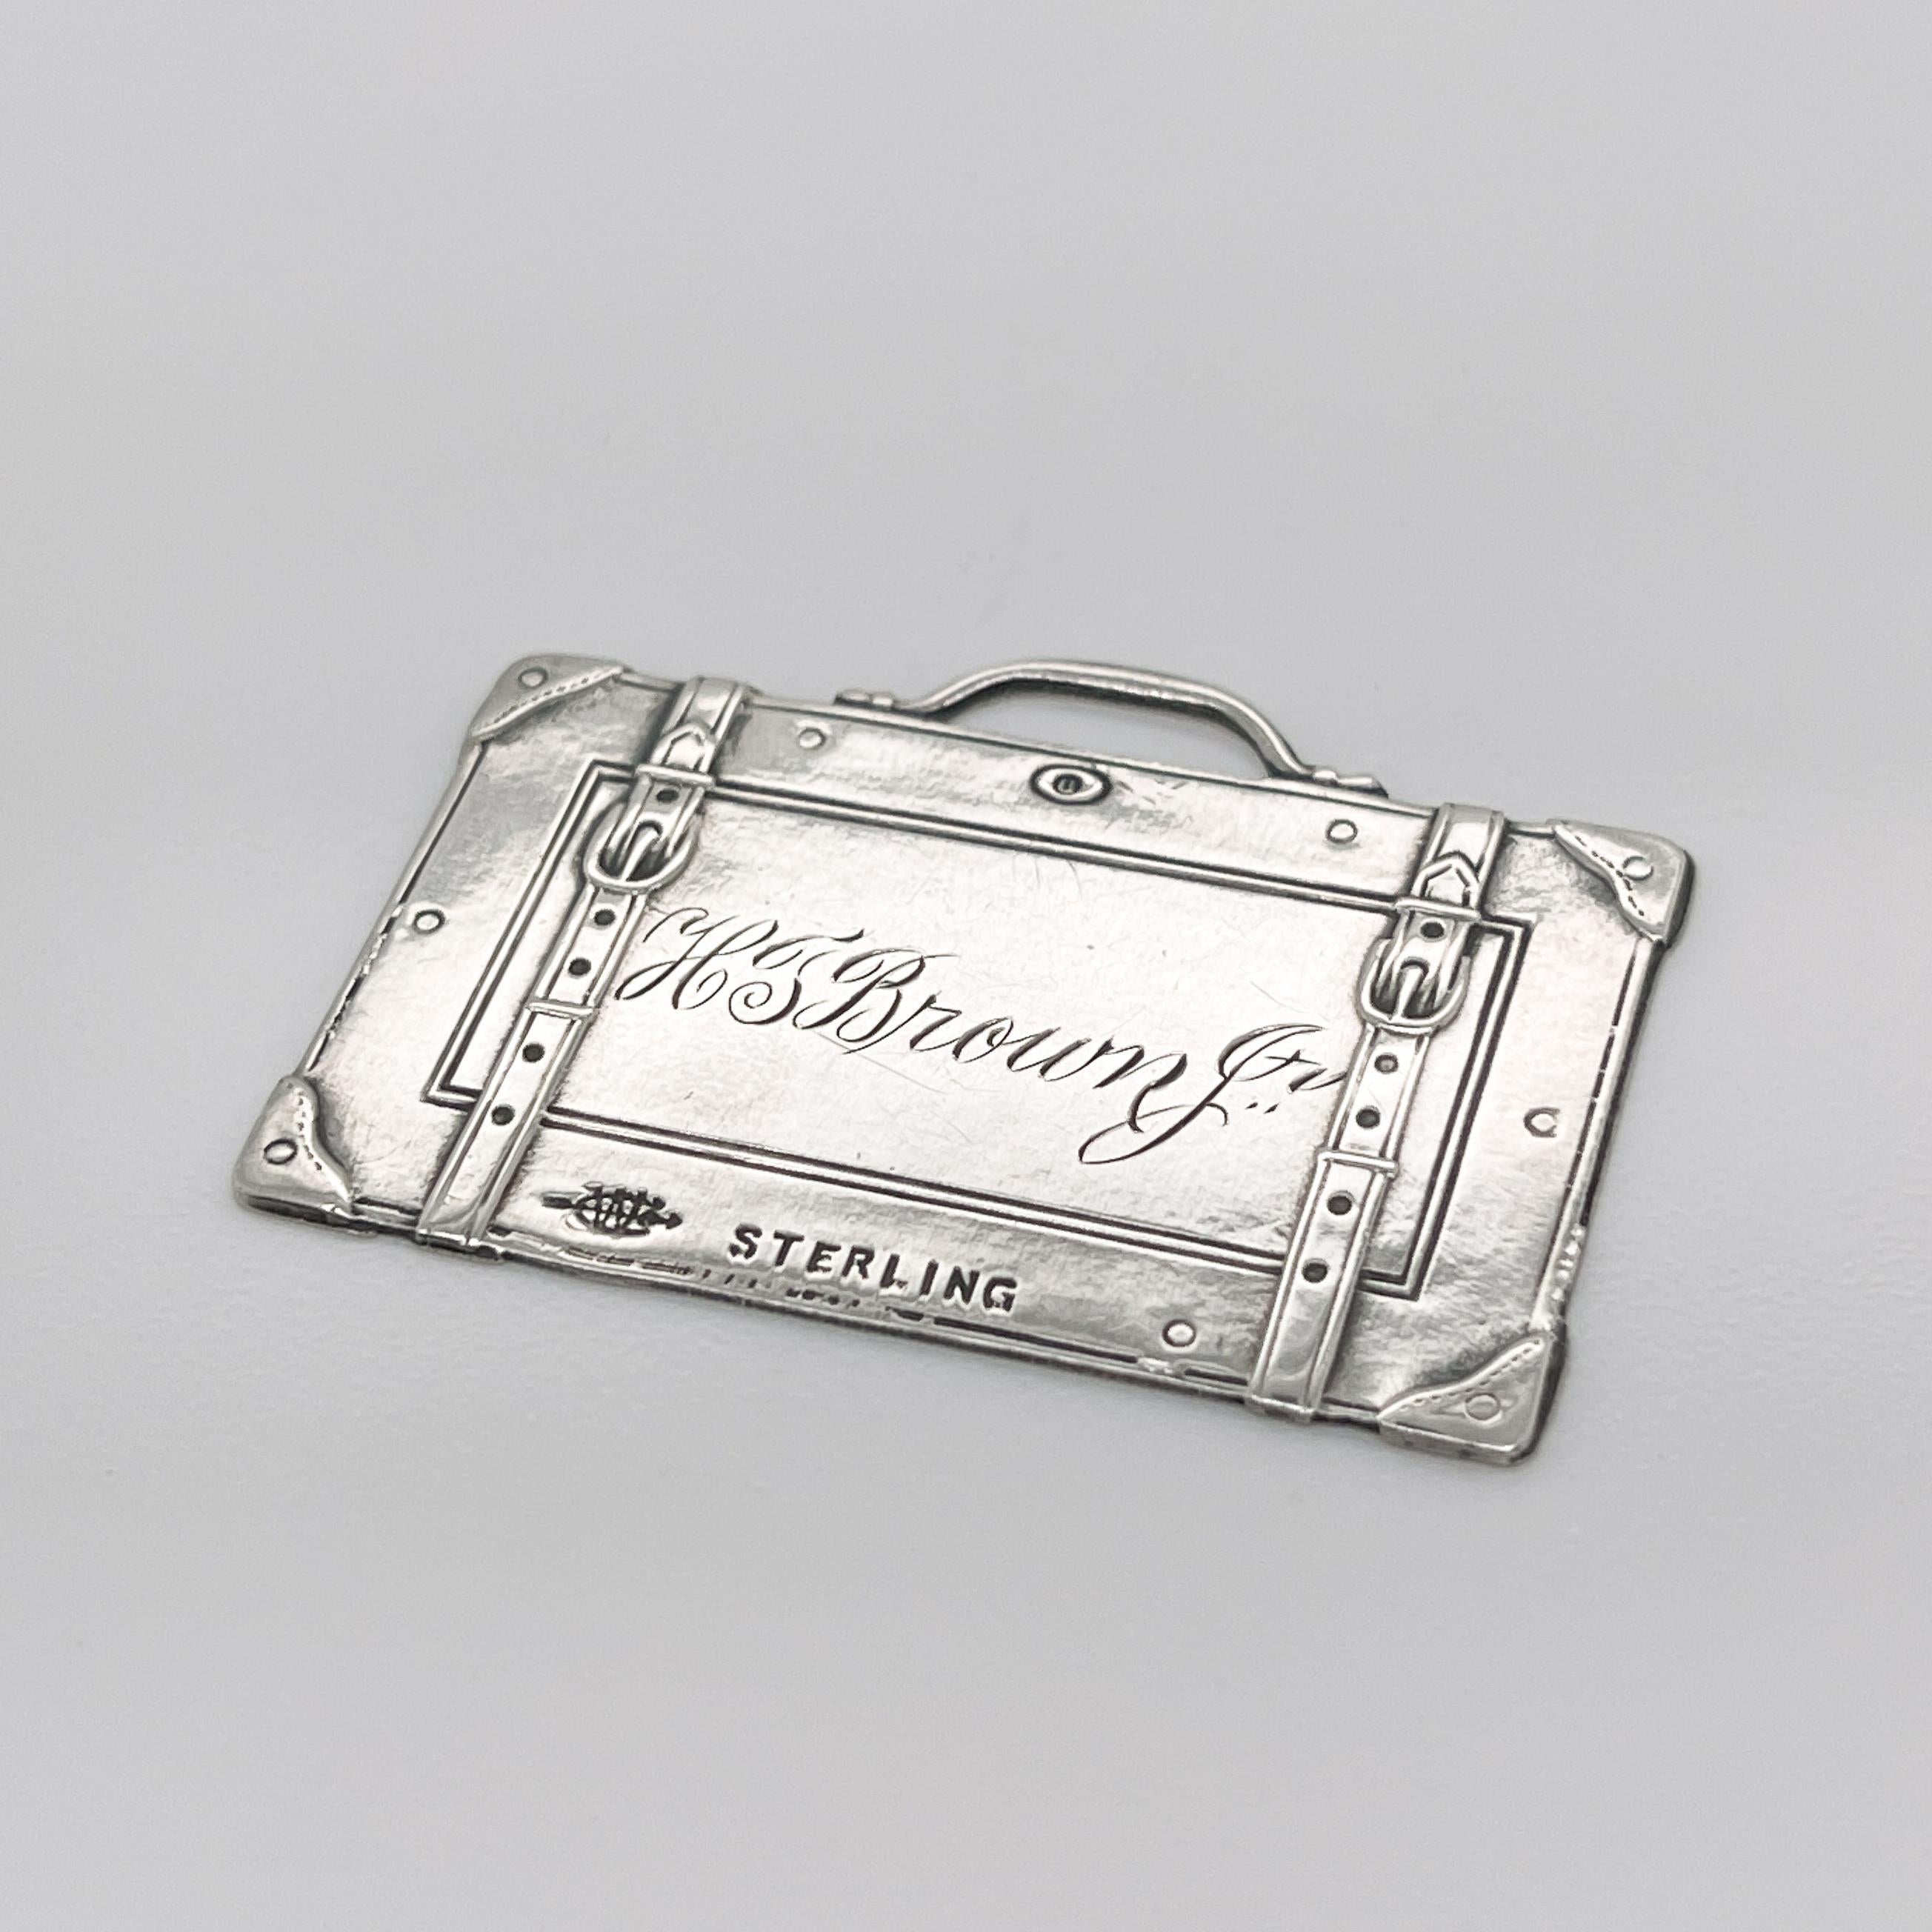 A fine vintage suitcase shaped luggage tag.

In sterling silver with raised buckles and corners to the case.

Made by the Webster Silver Co. 

Simply a terrific piece!

Date:
Early 20th Century

Overall Condition:
It is in overall good, as-pictured,